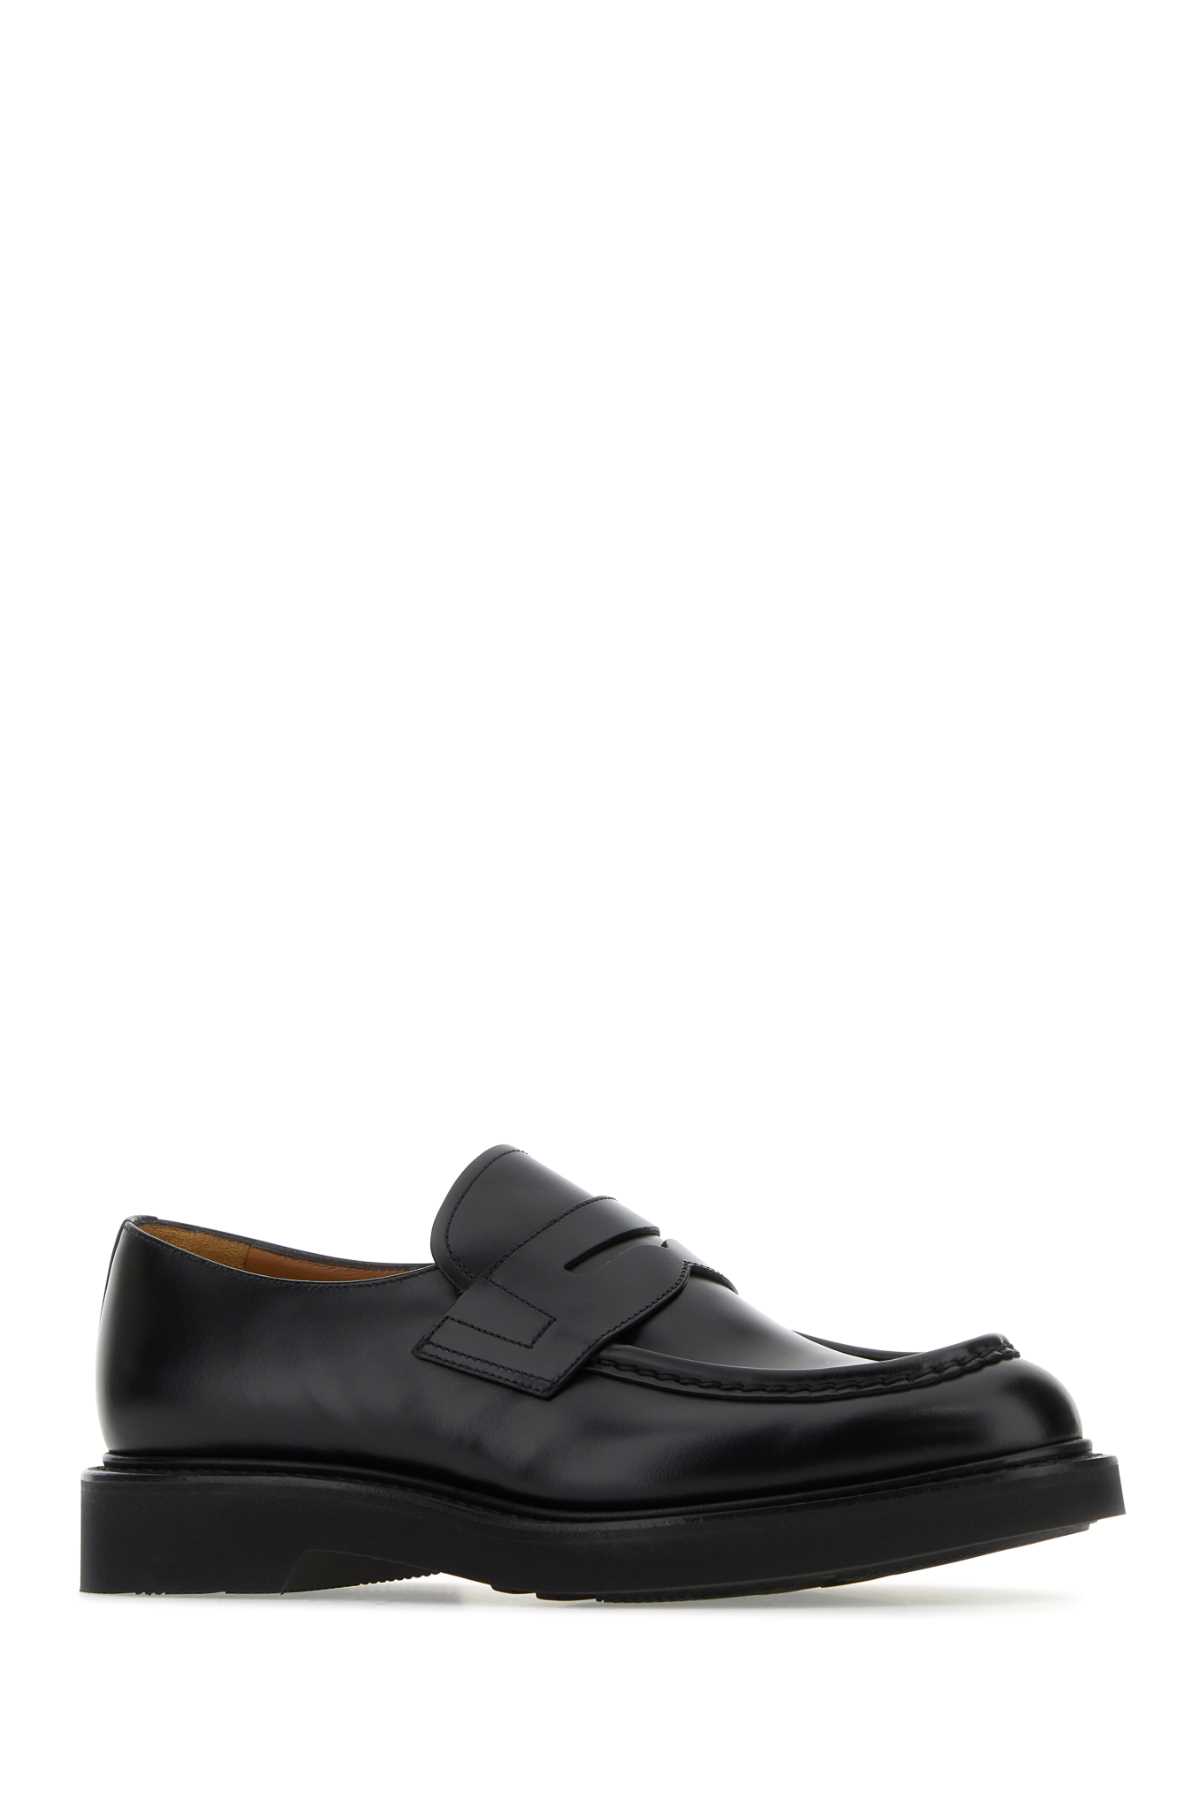 Church's Black Leather Lynton Loafers